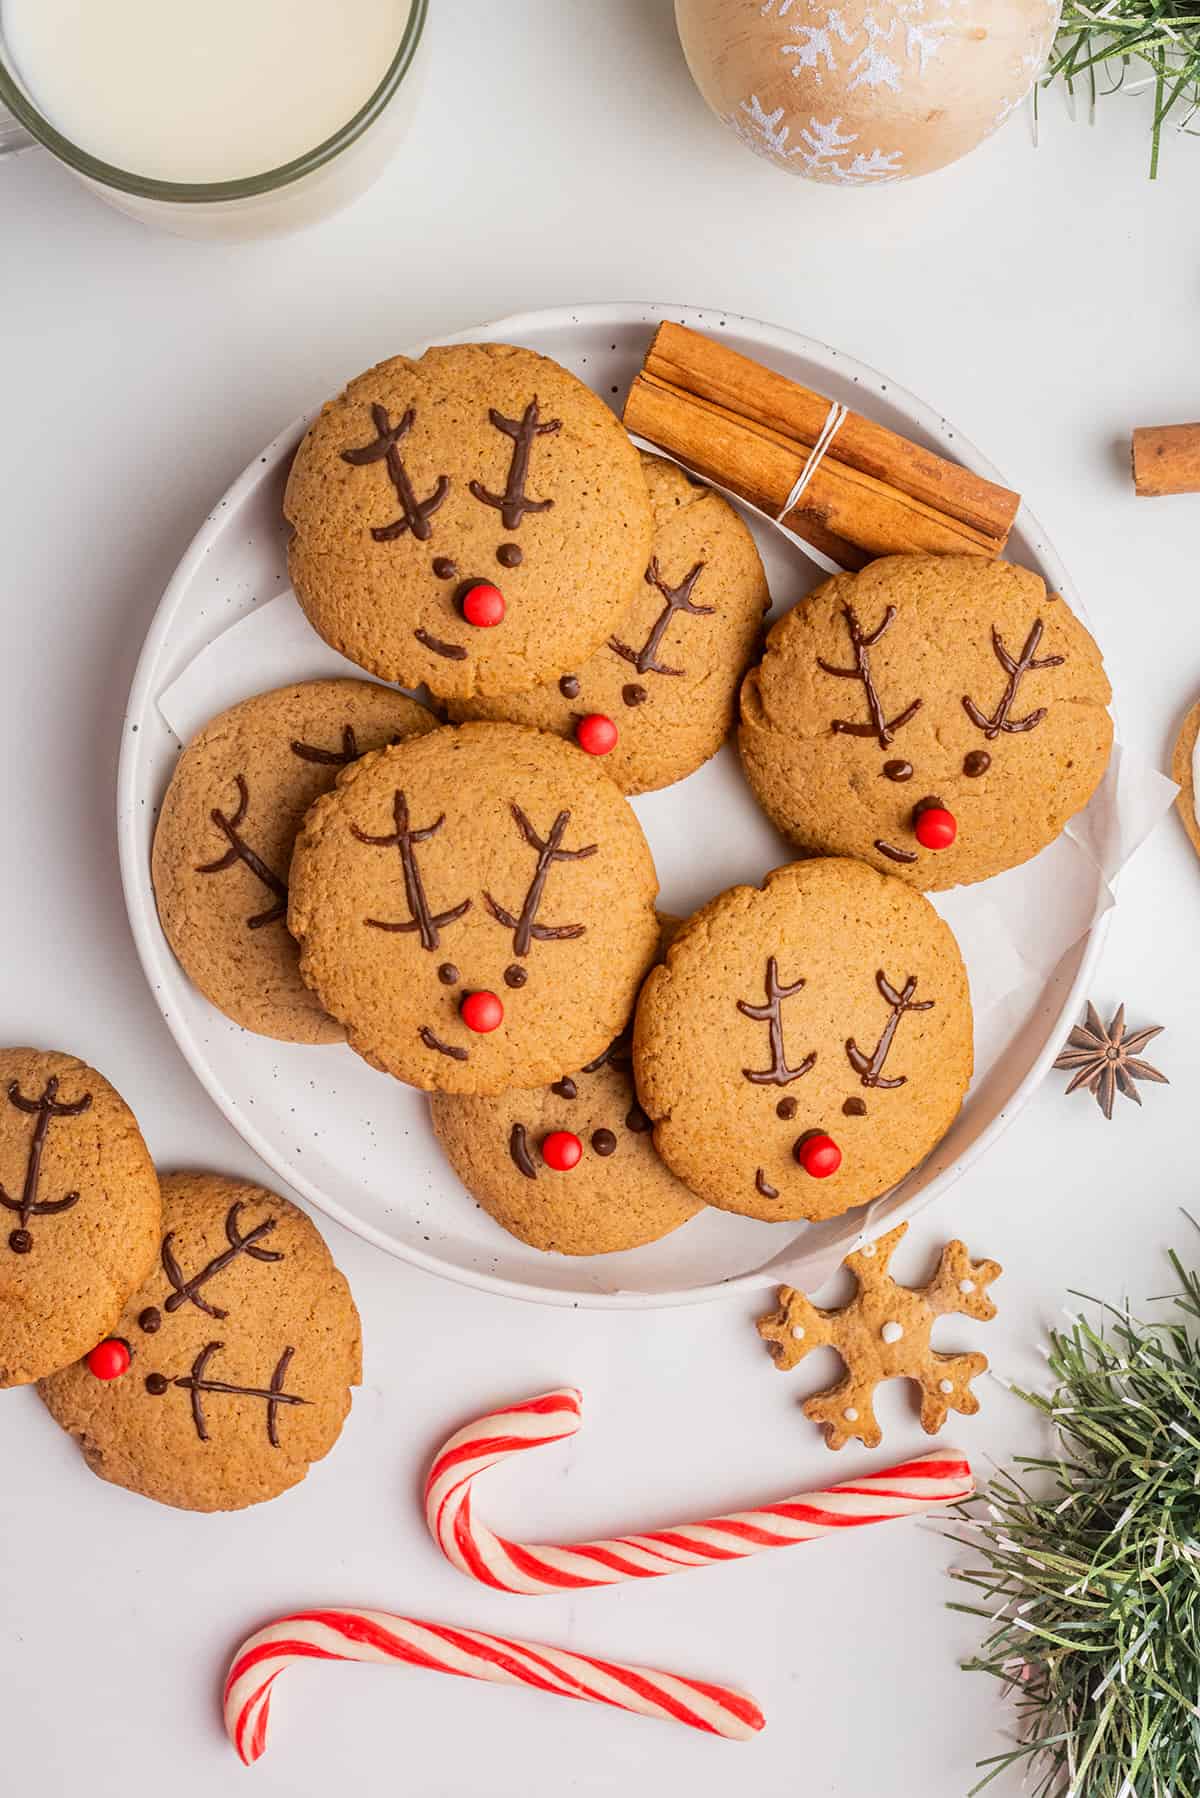 A plate of Gingerbread Reindeer Cookies next to candy canes and holiday decorations.